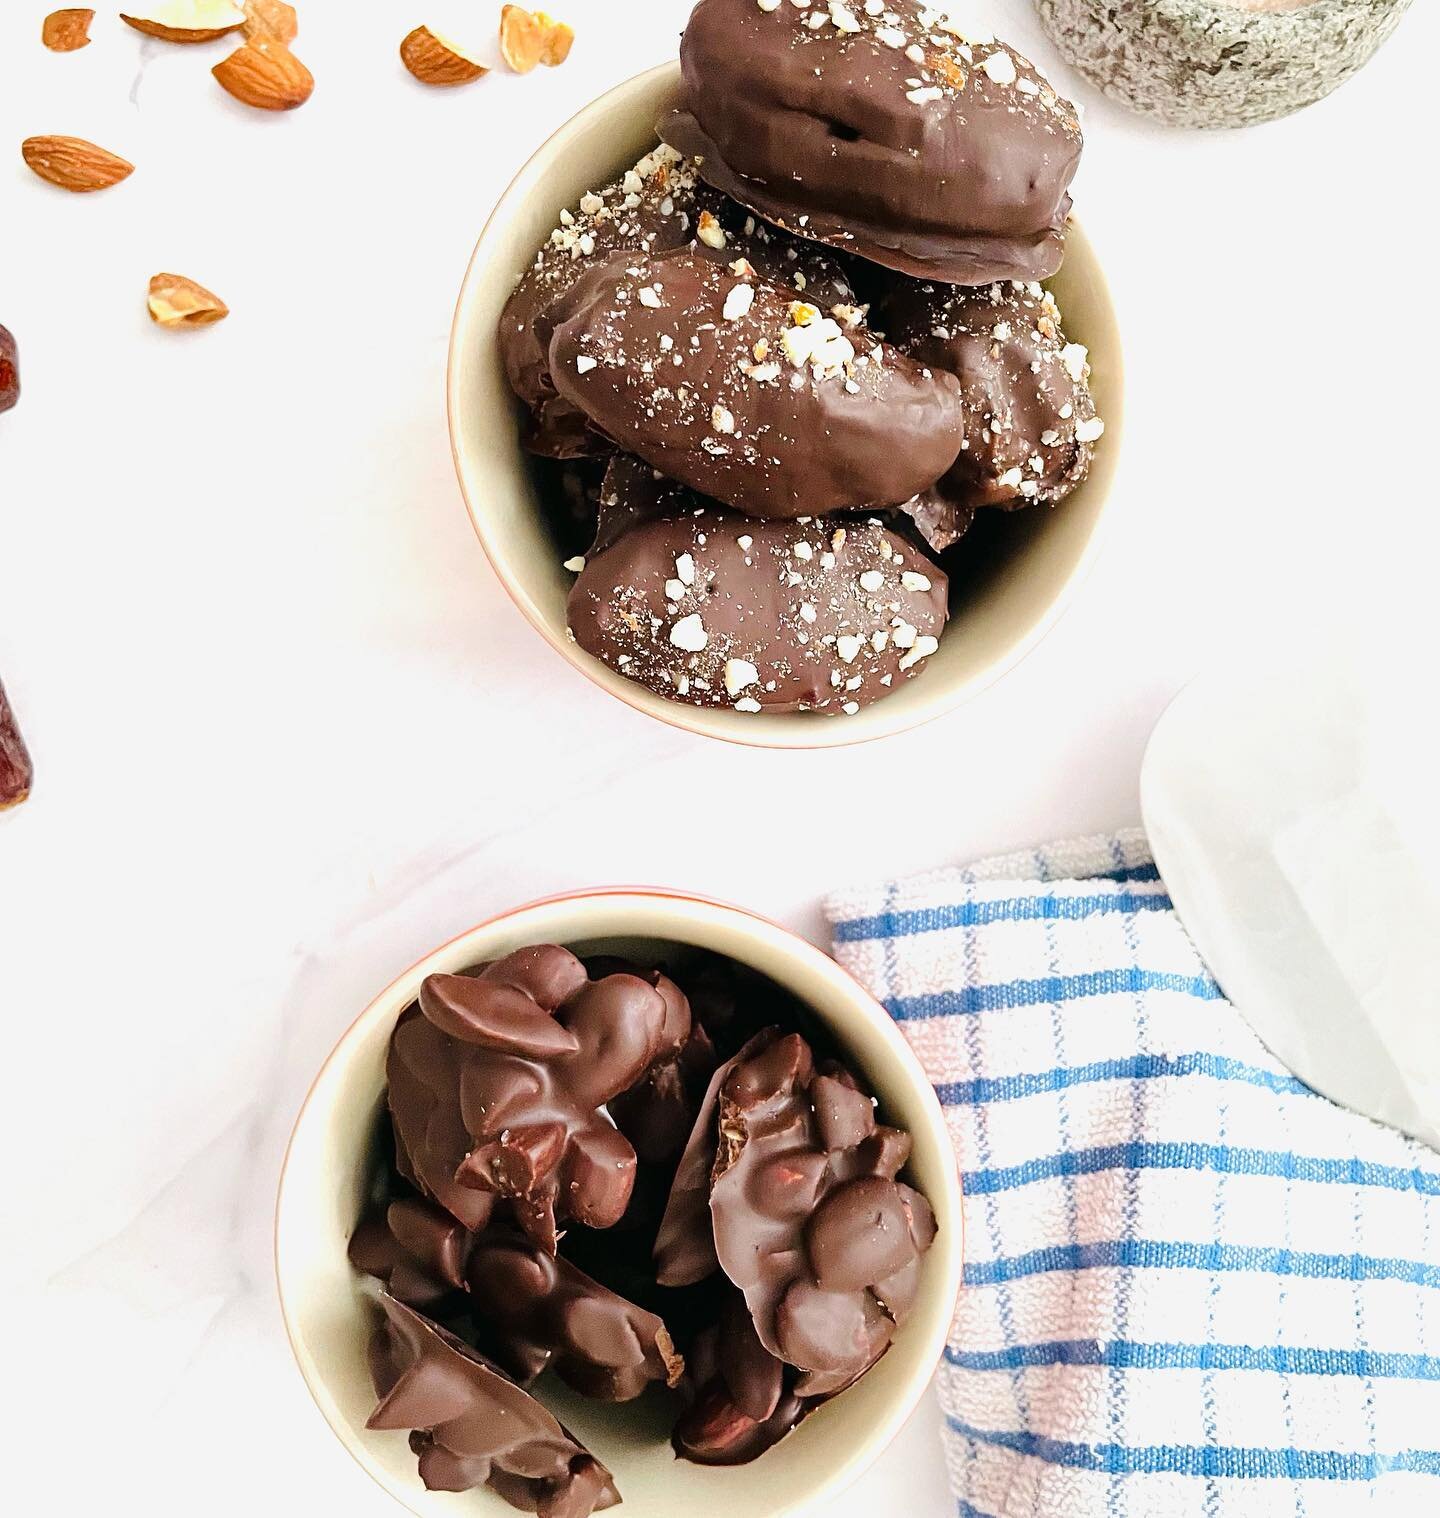 Salted Almond stuffed Dates!
Ridiculously delicious!😋.
.
.
.

.
#dates #vitaminfood #nutritiousfood #healwithnutrition #healthyrecipes #snacks #chocolatelover #chocolate